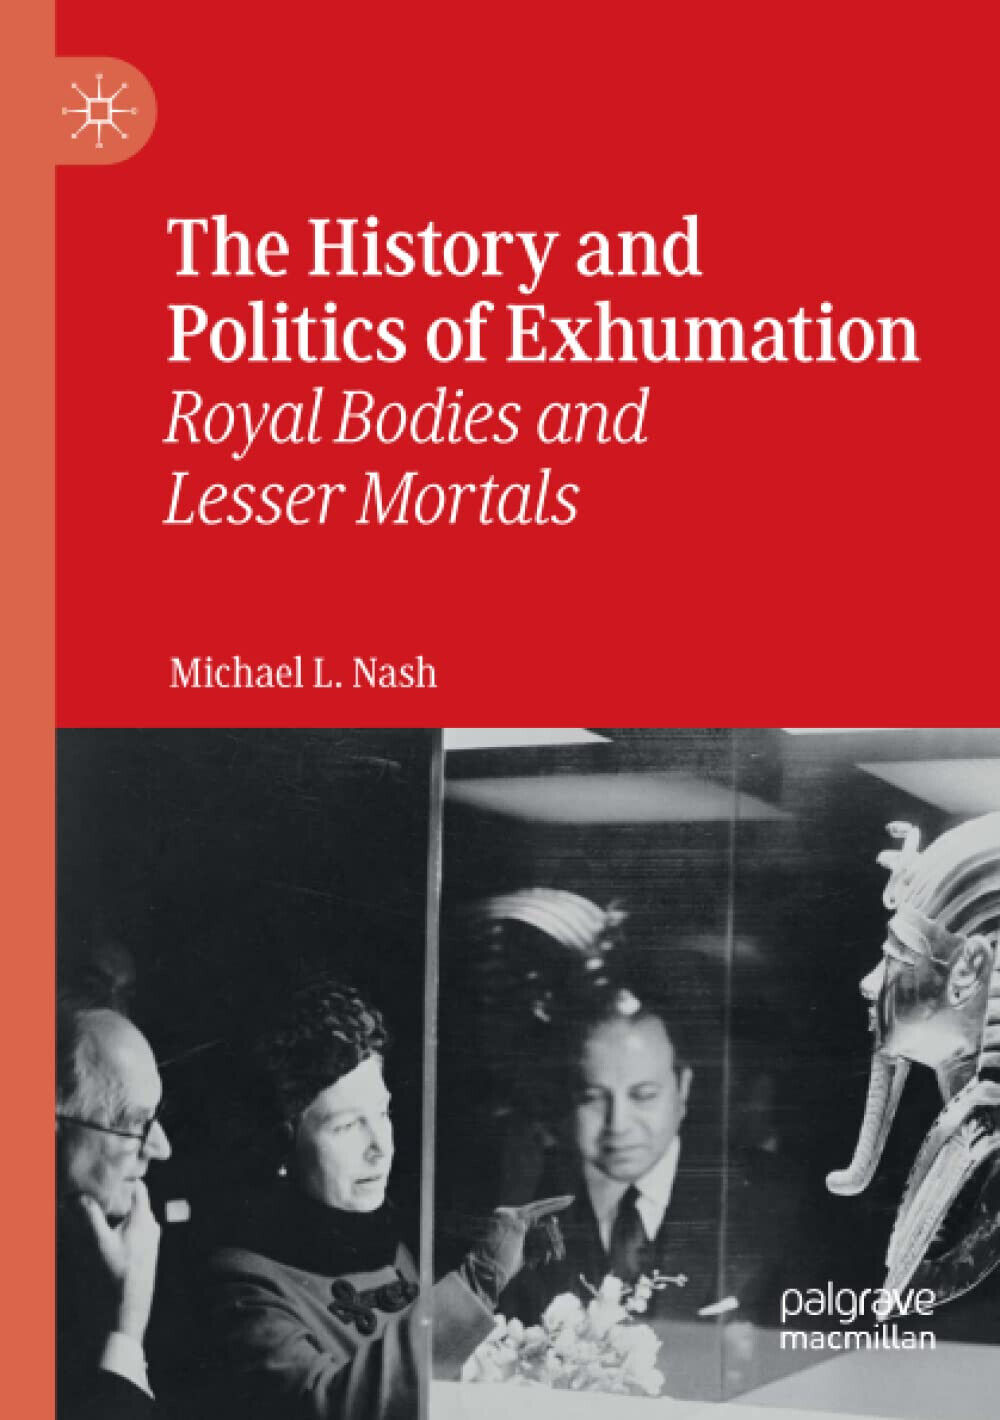 The History and Politics of Exhumation - Michael L. Nash - Palgrave, 2020